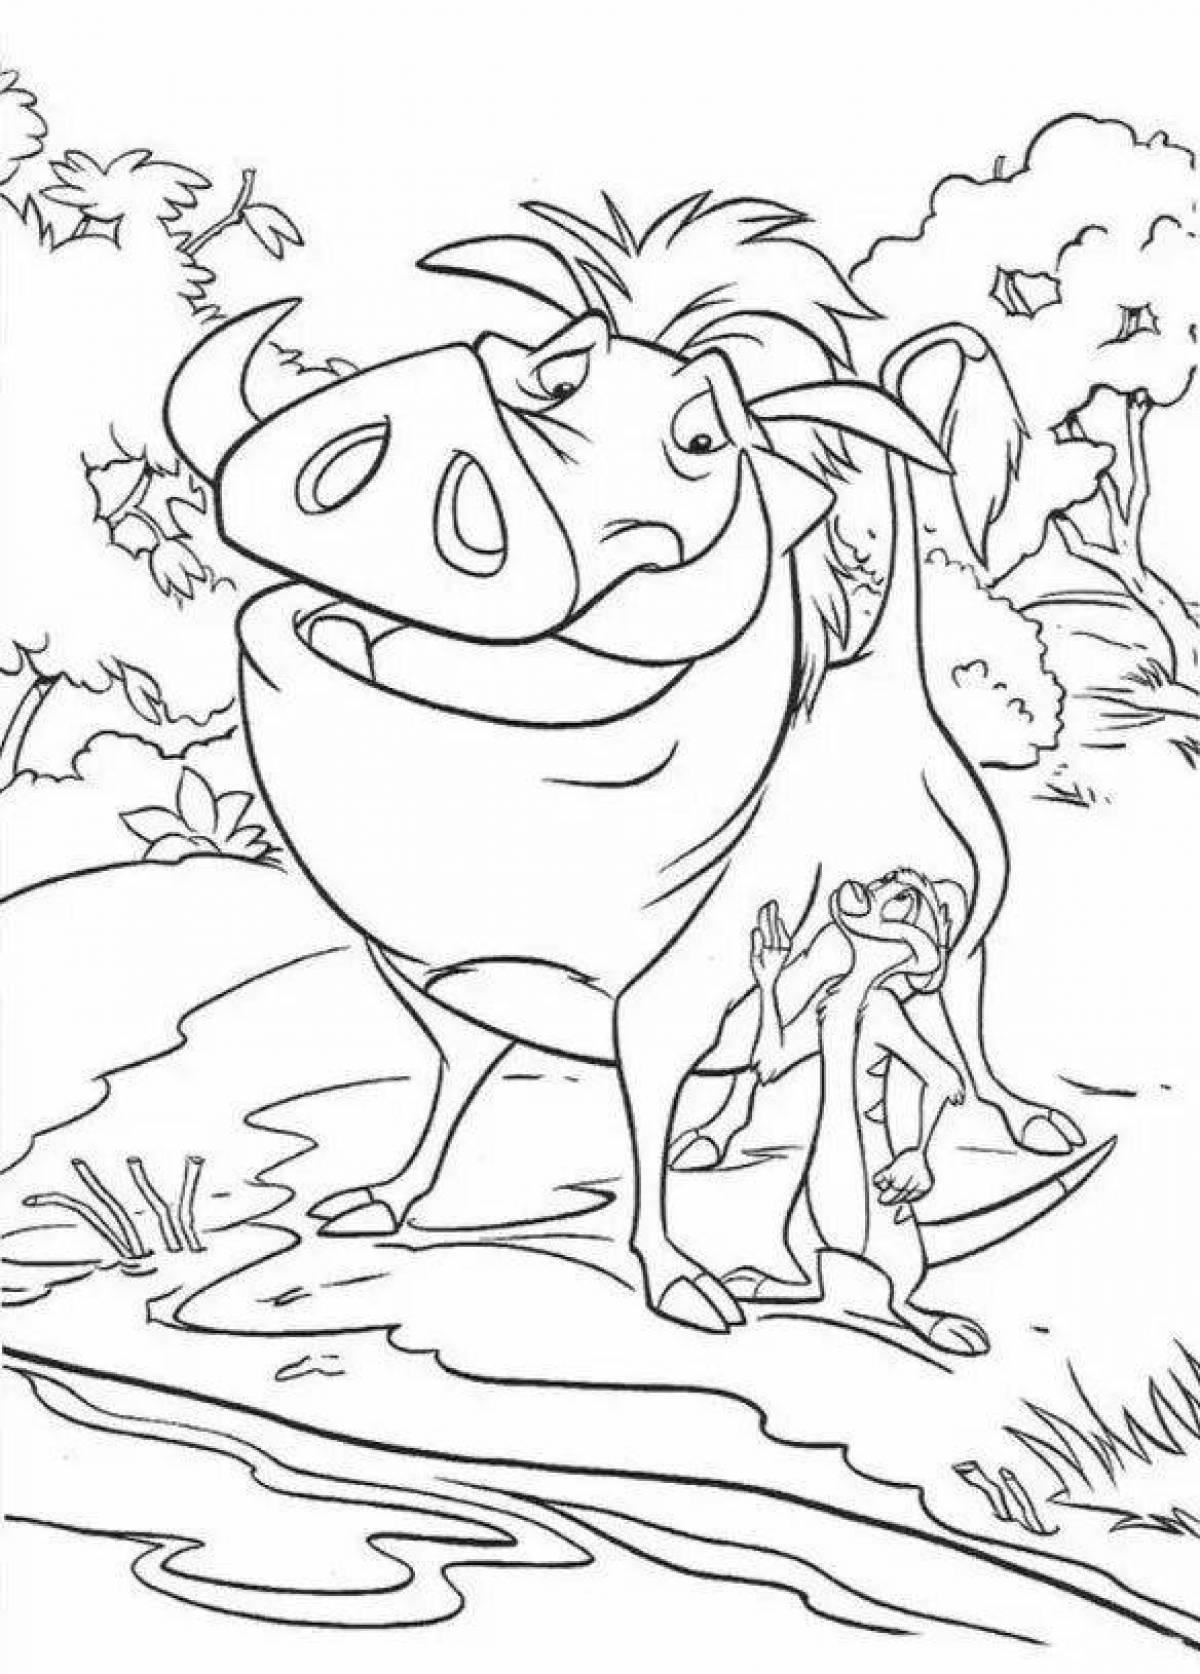 Adorable Pumbaa Coloring Page